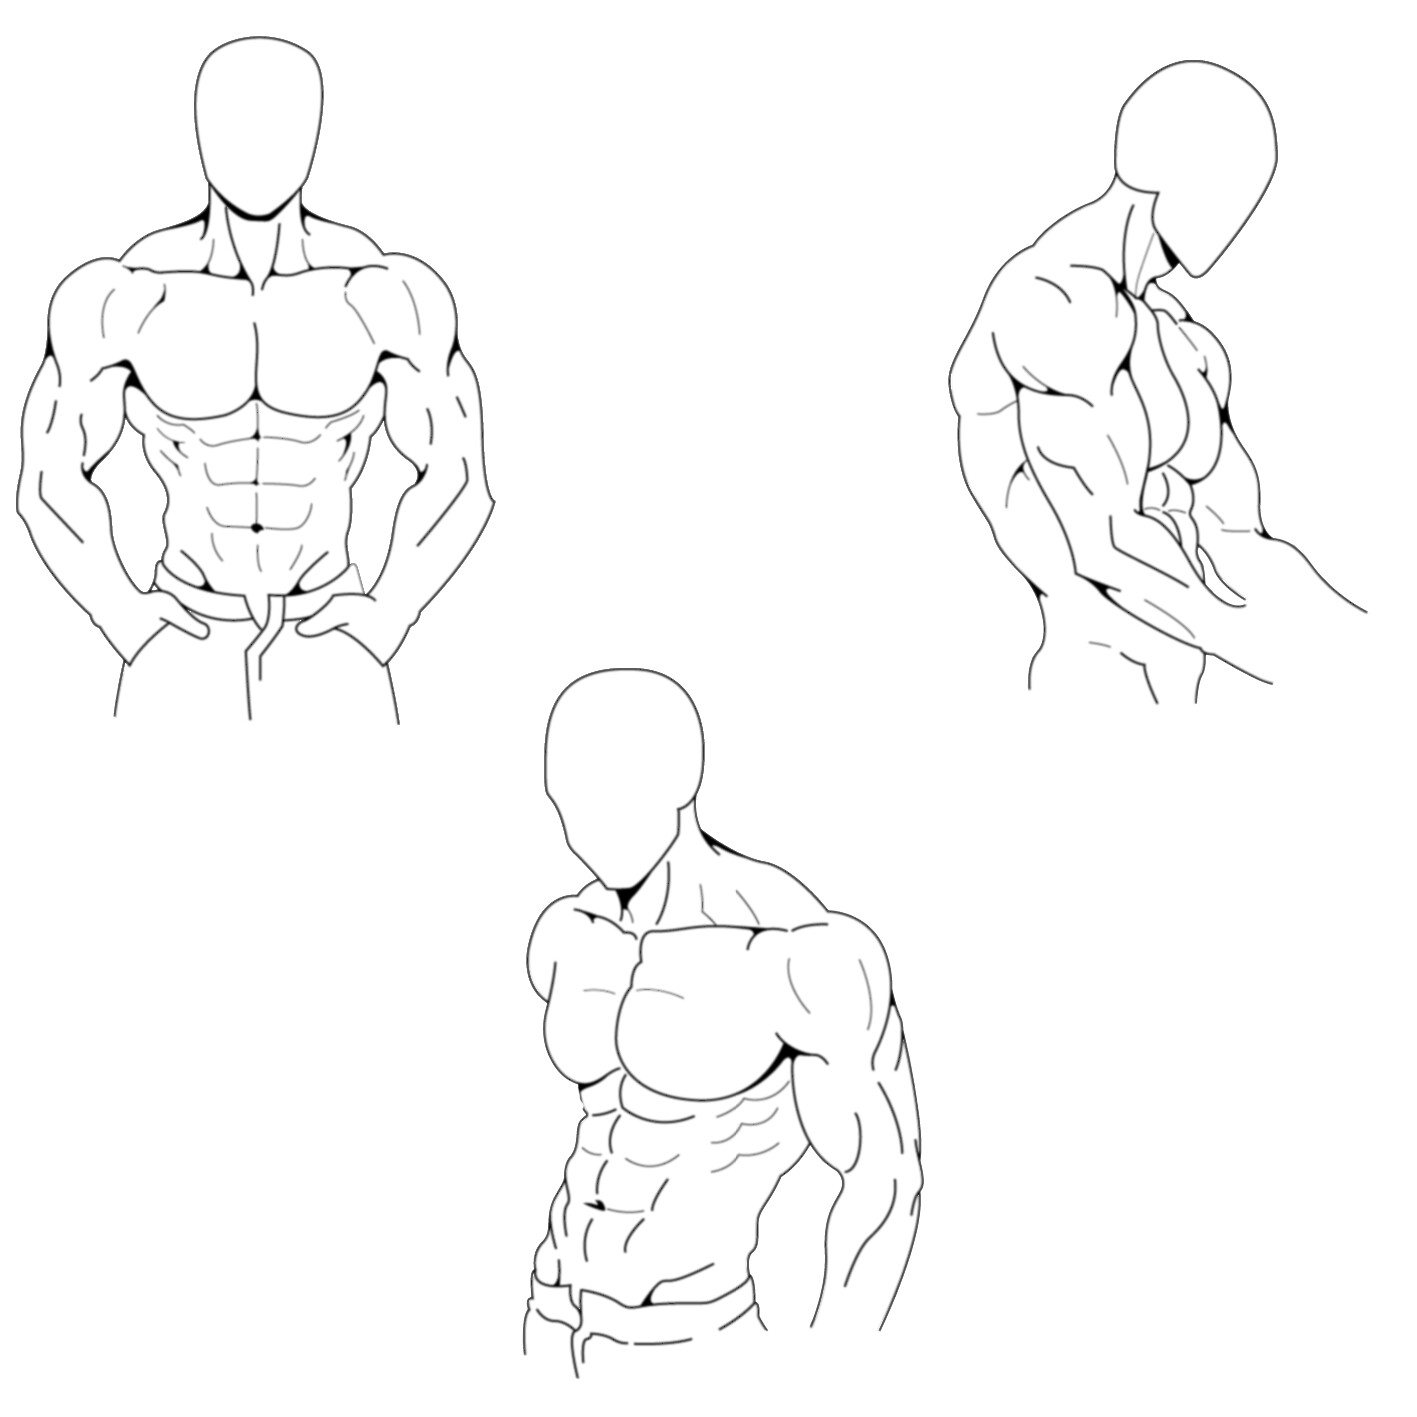 140,125 Man Body Drawing Images, Stock Photos, 3D objects, & Vectors |  Shutterstock